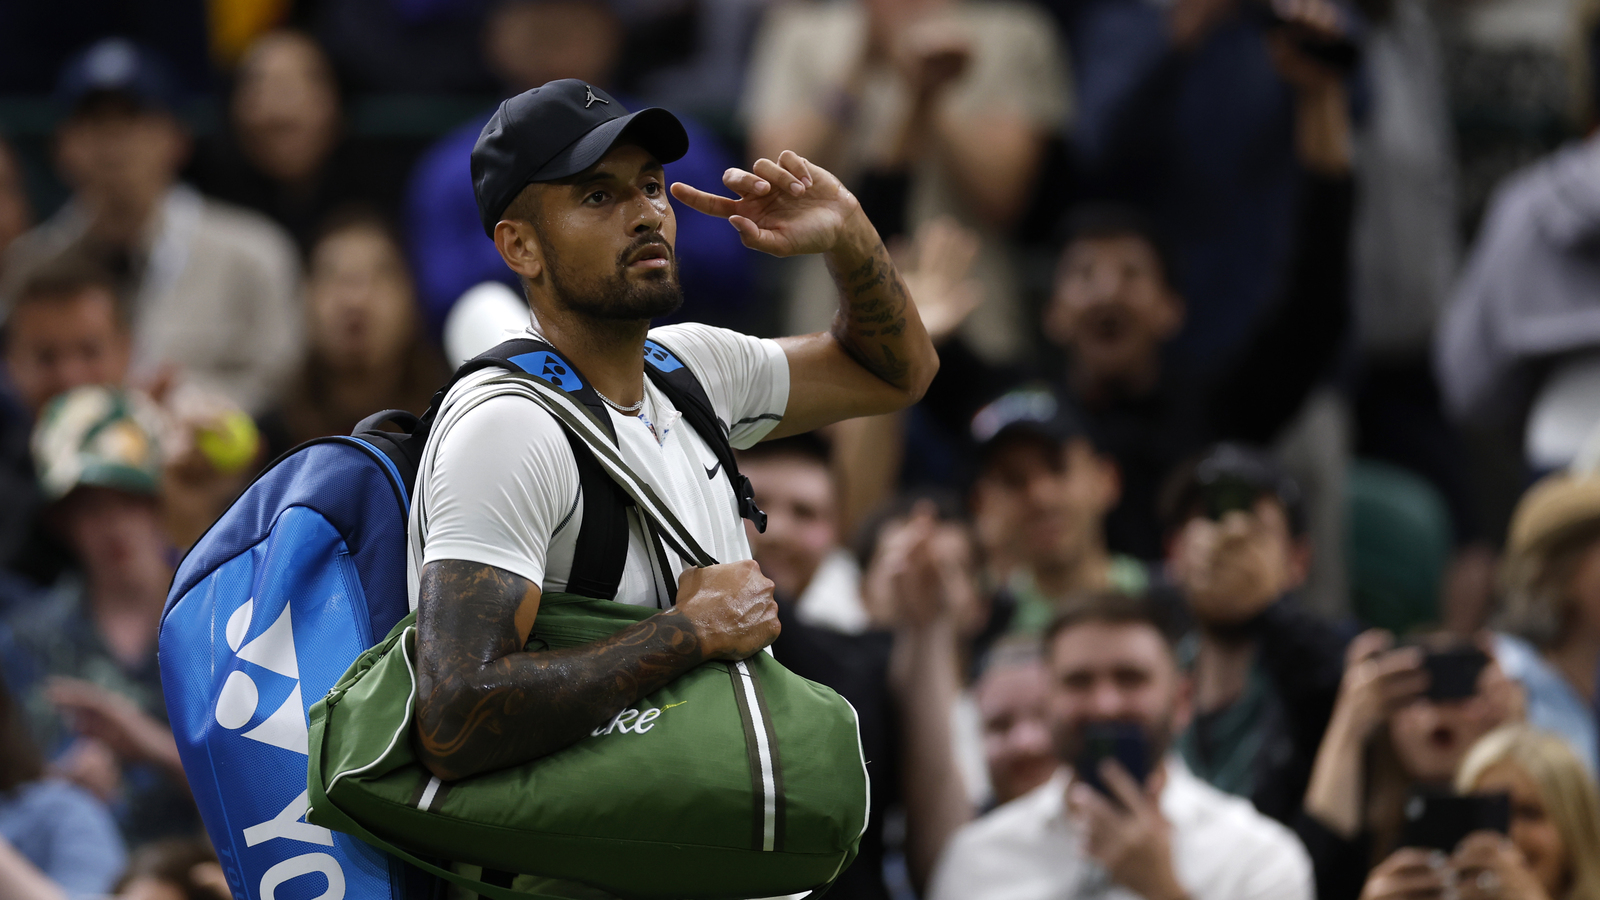 Nick Kyrgios revisits rivalry with Stefanos Tsitsipas over a nostalgic social media post as he prepares for a grand comeback on court